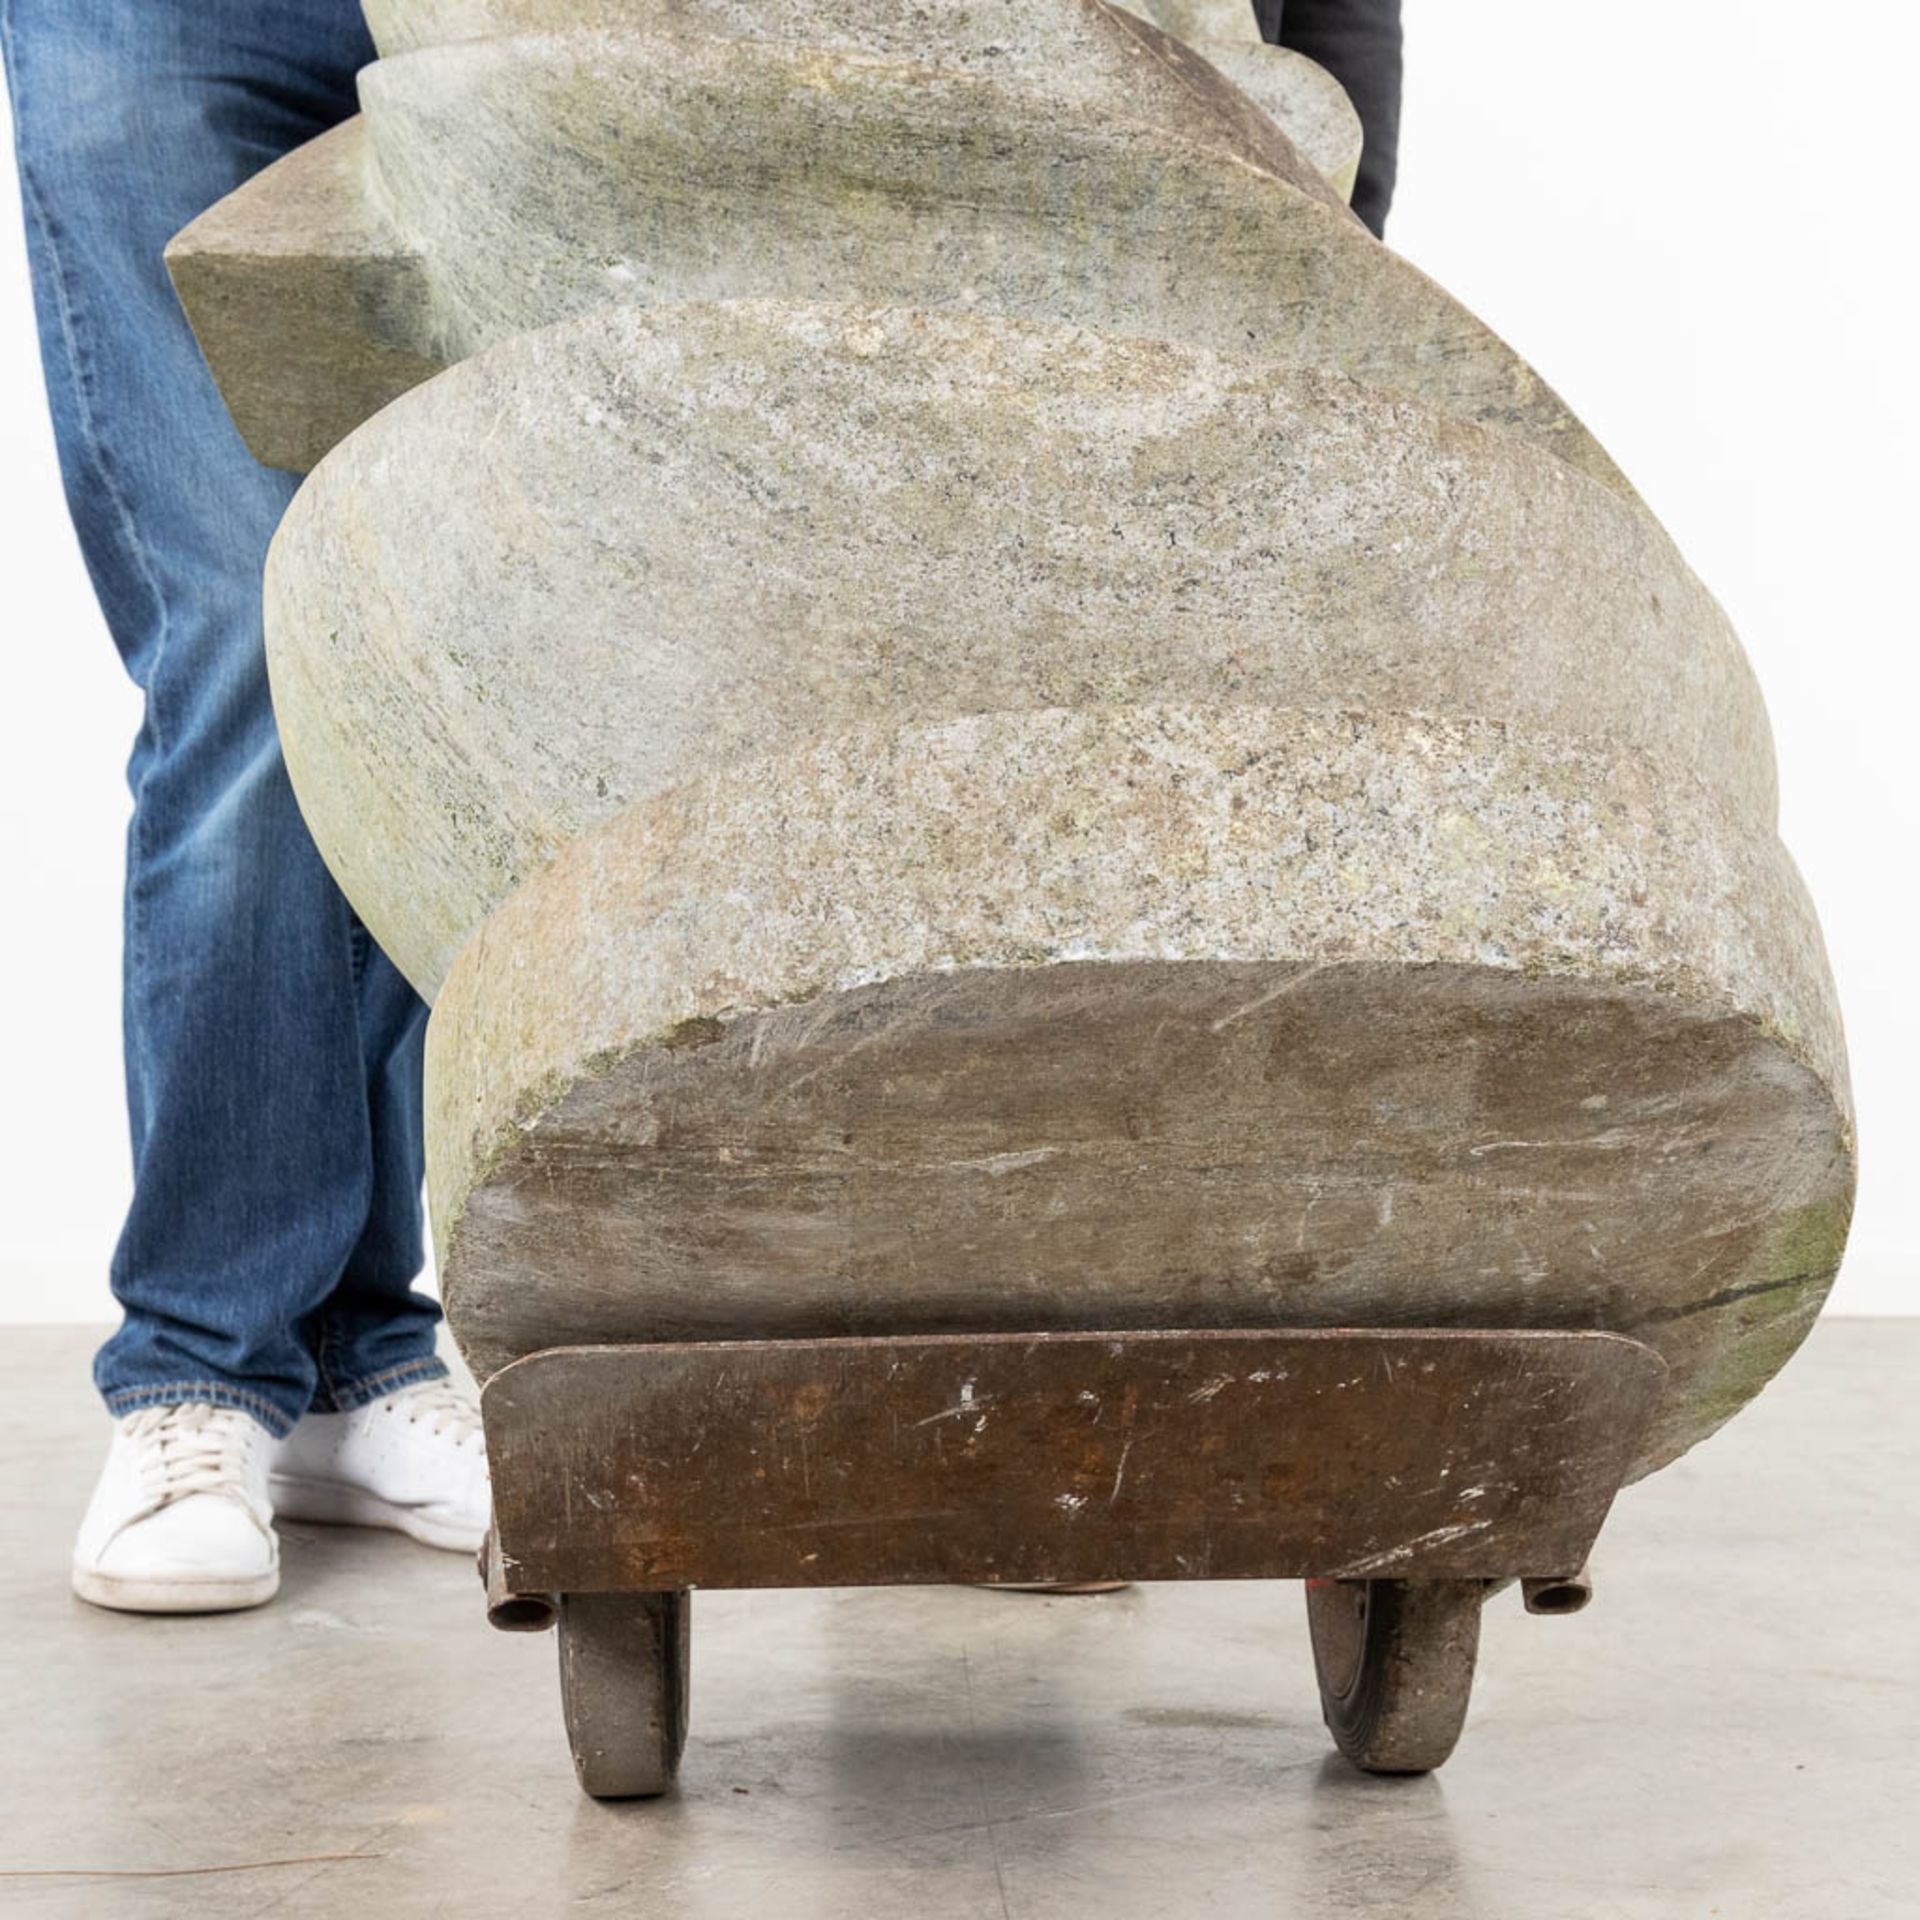 A modern large sculpture made of granite. (38 x 66 x 125cm) - Image 14 of 14